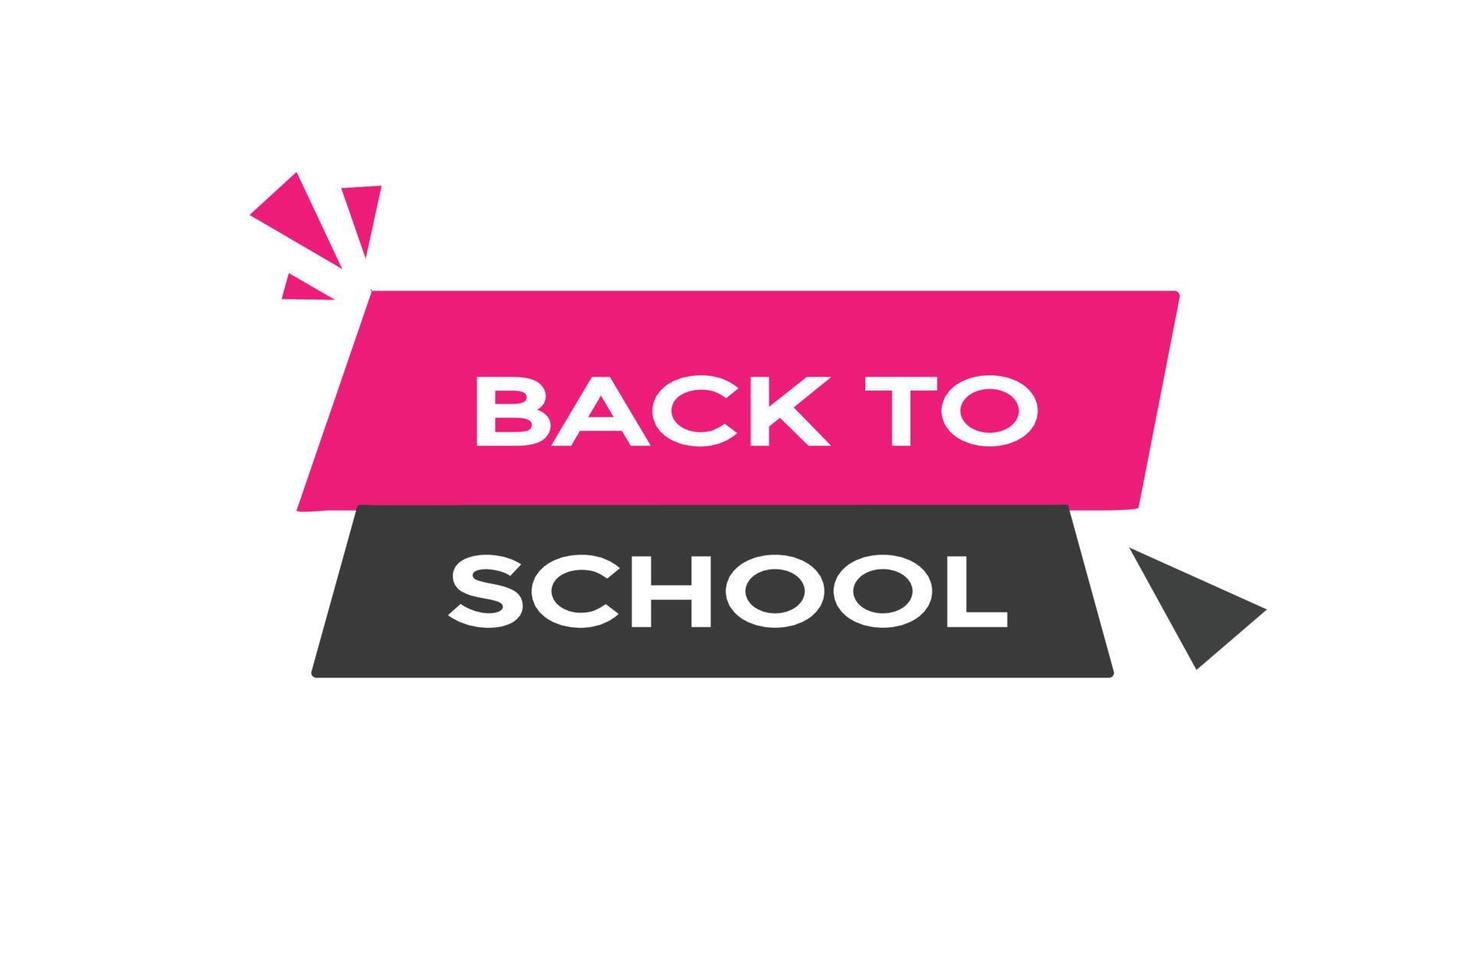 back to school button vectors.sign label speech bubble back to school vector